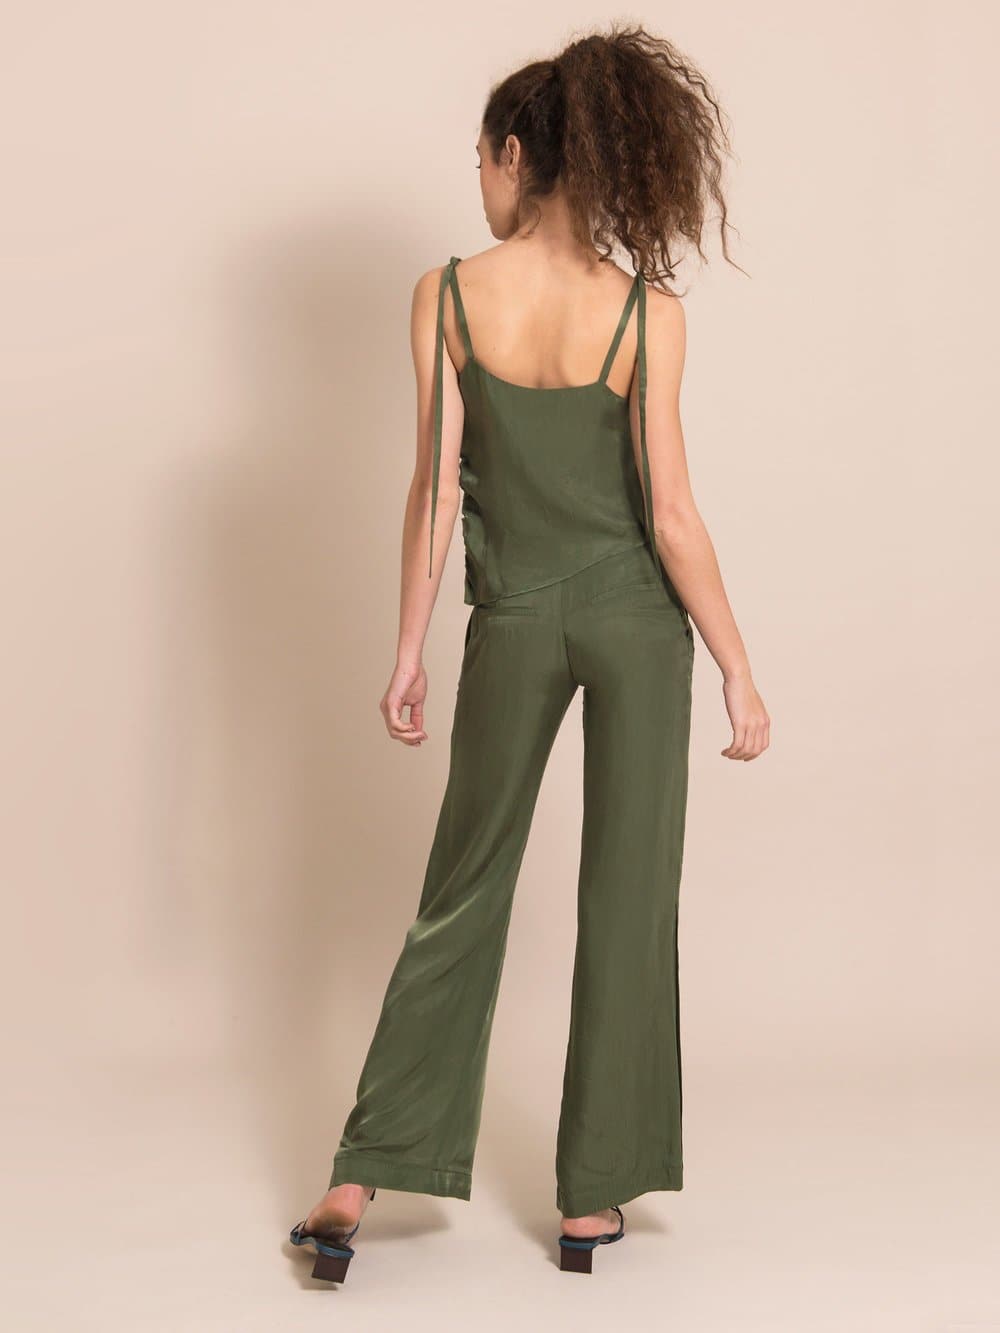 Backshot of a woman wearing a sustainable set in military green - a sleeveless top with adjustable shoulder straps and loose, flared, summer  trousers